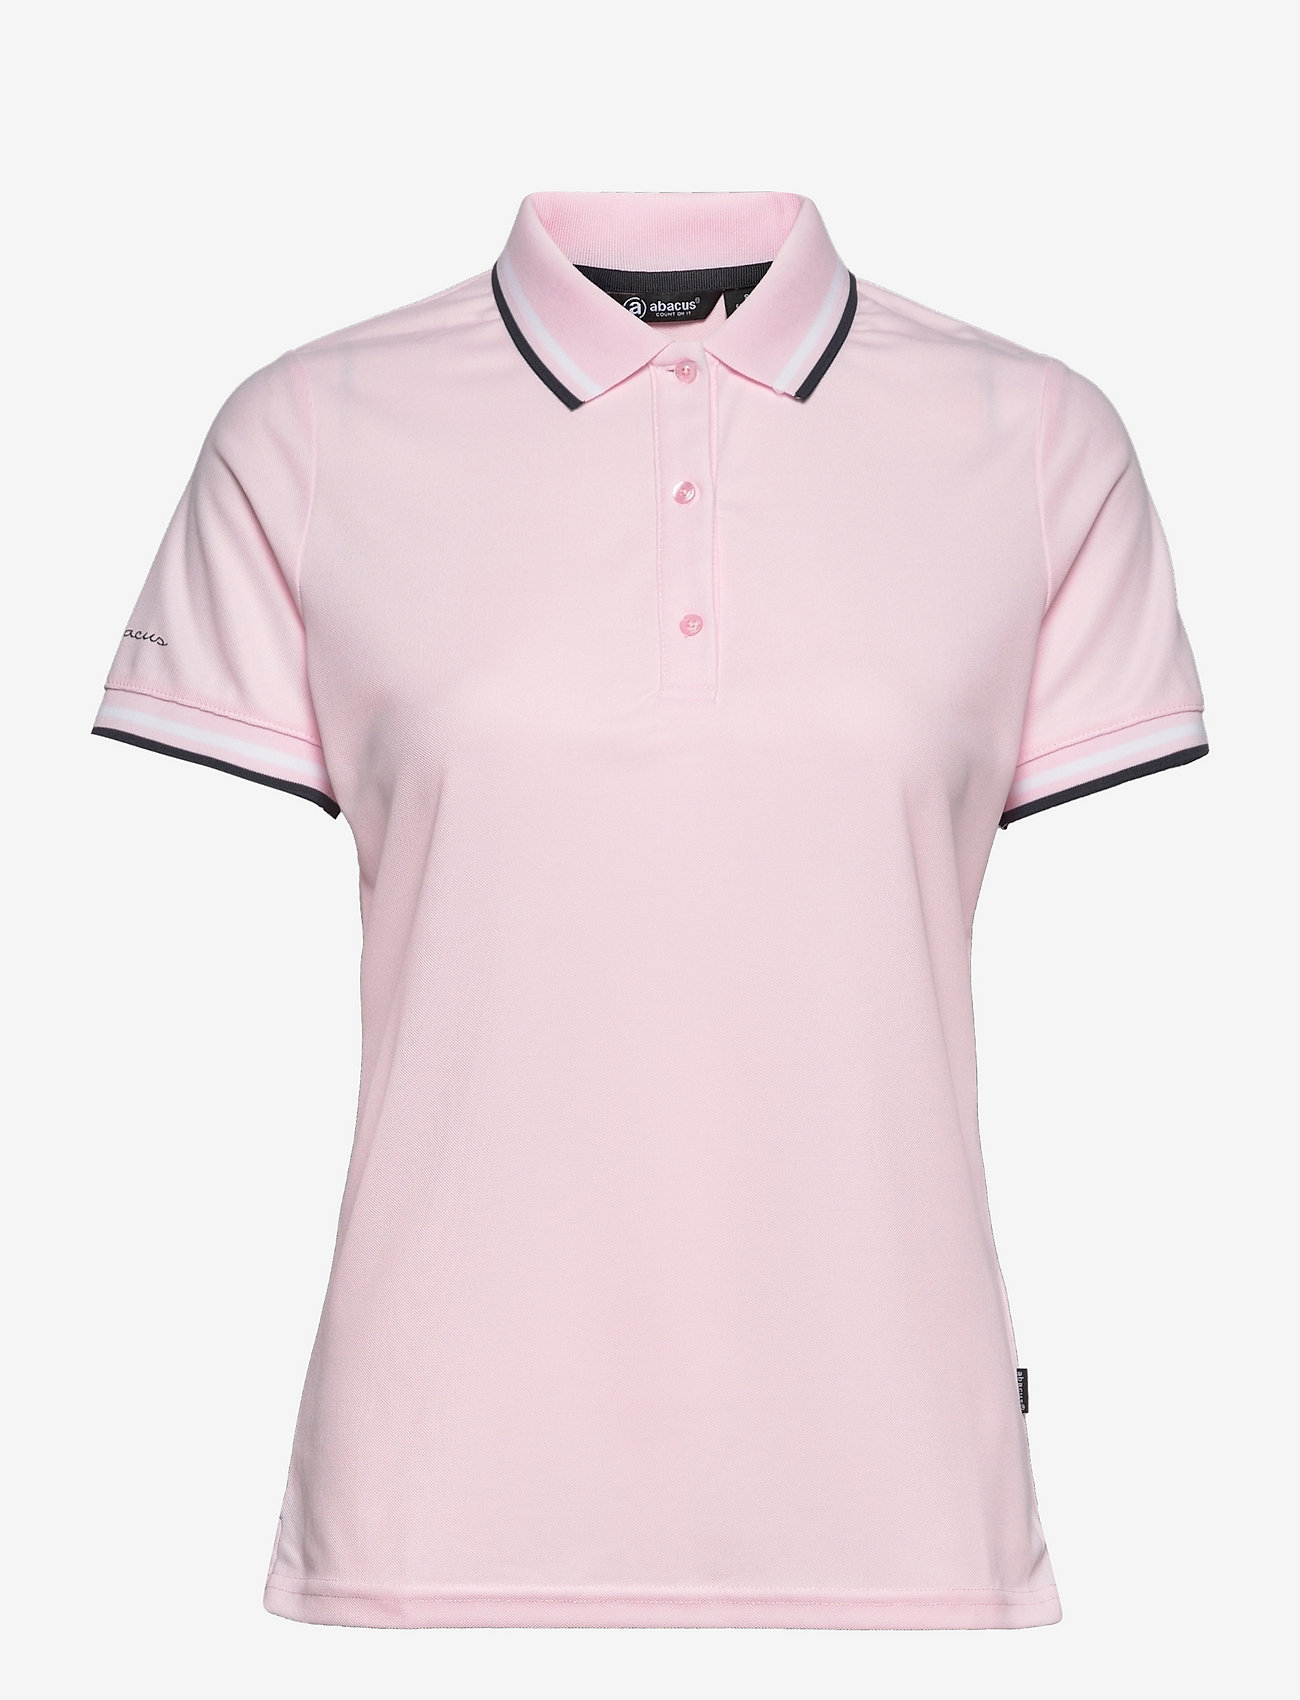 Abacus - Lds Pines polo - polo's - lt.pink - 0